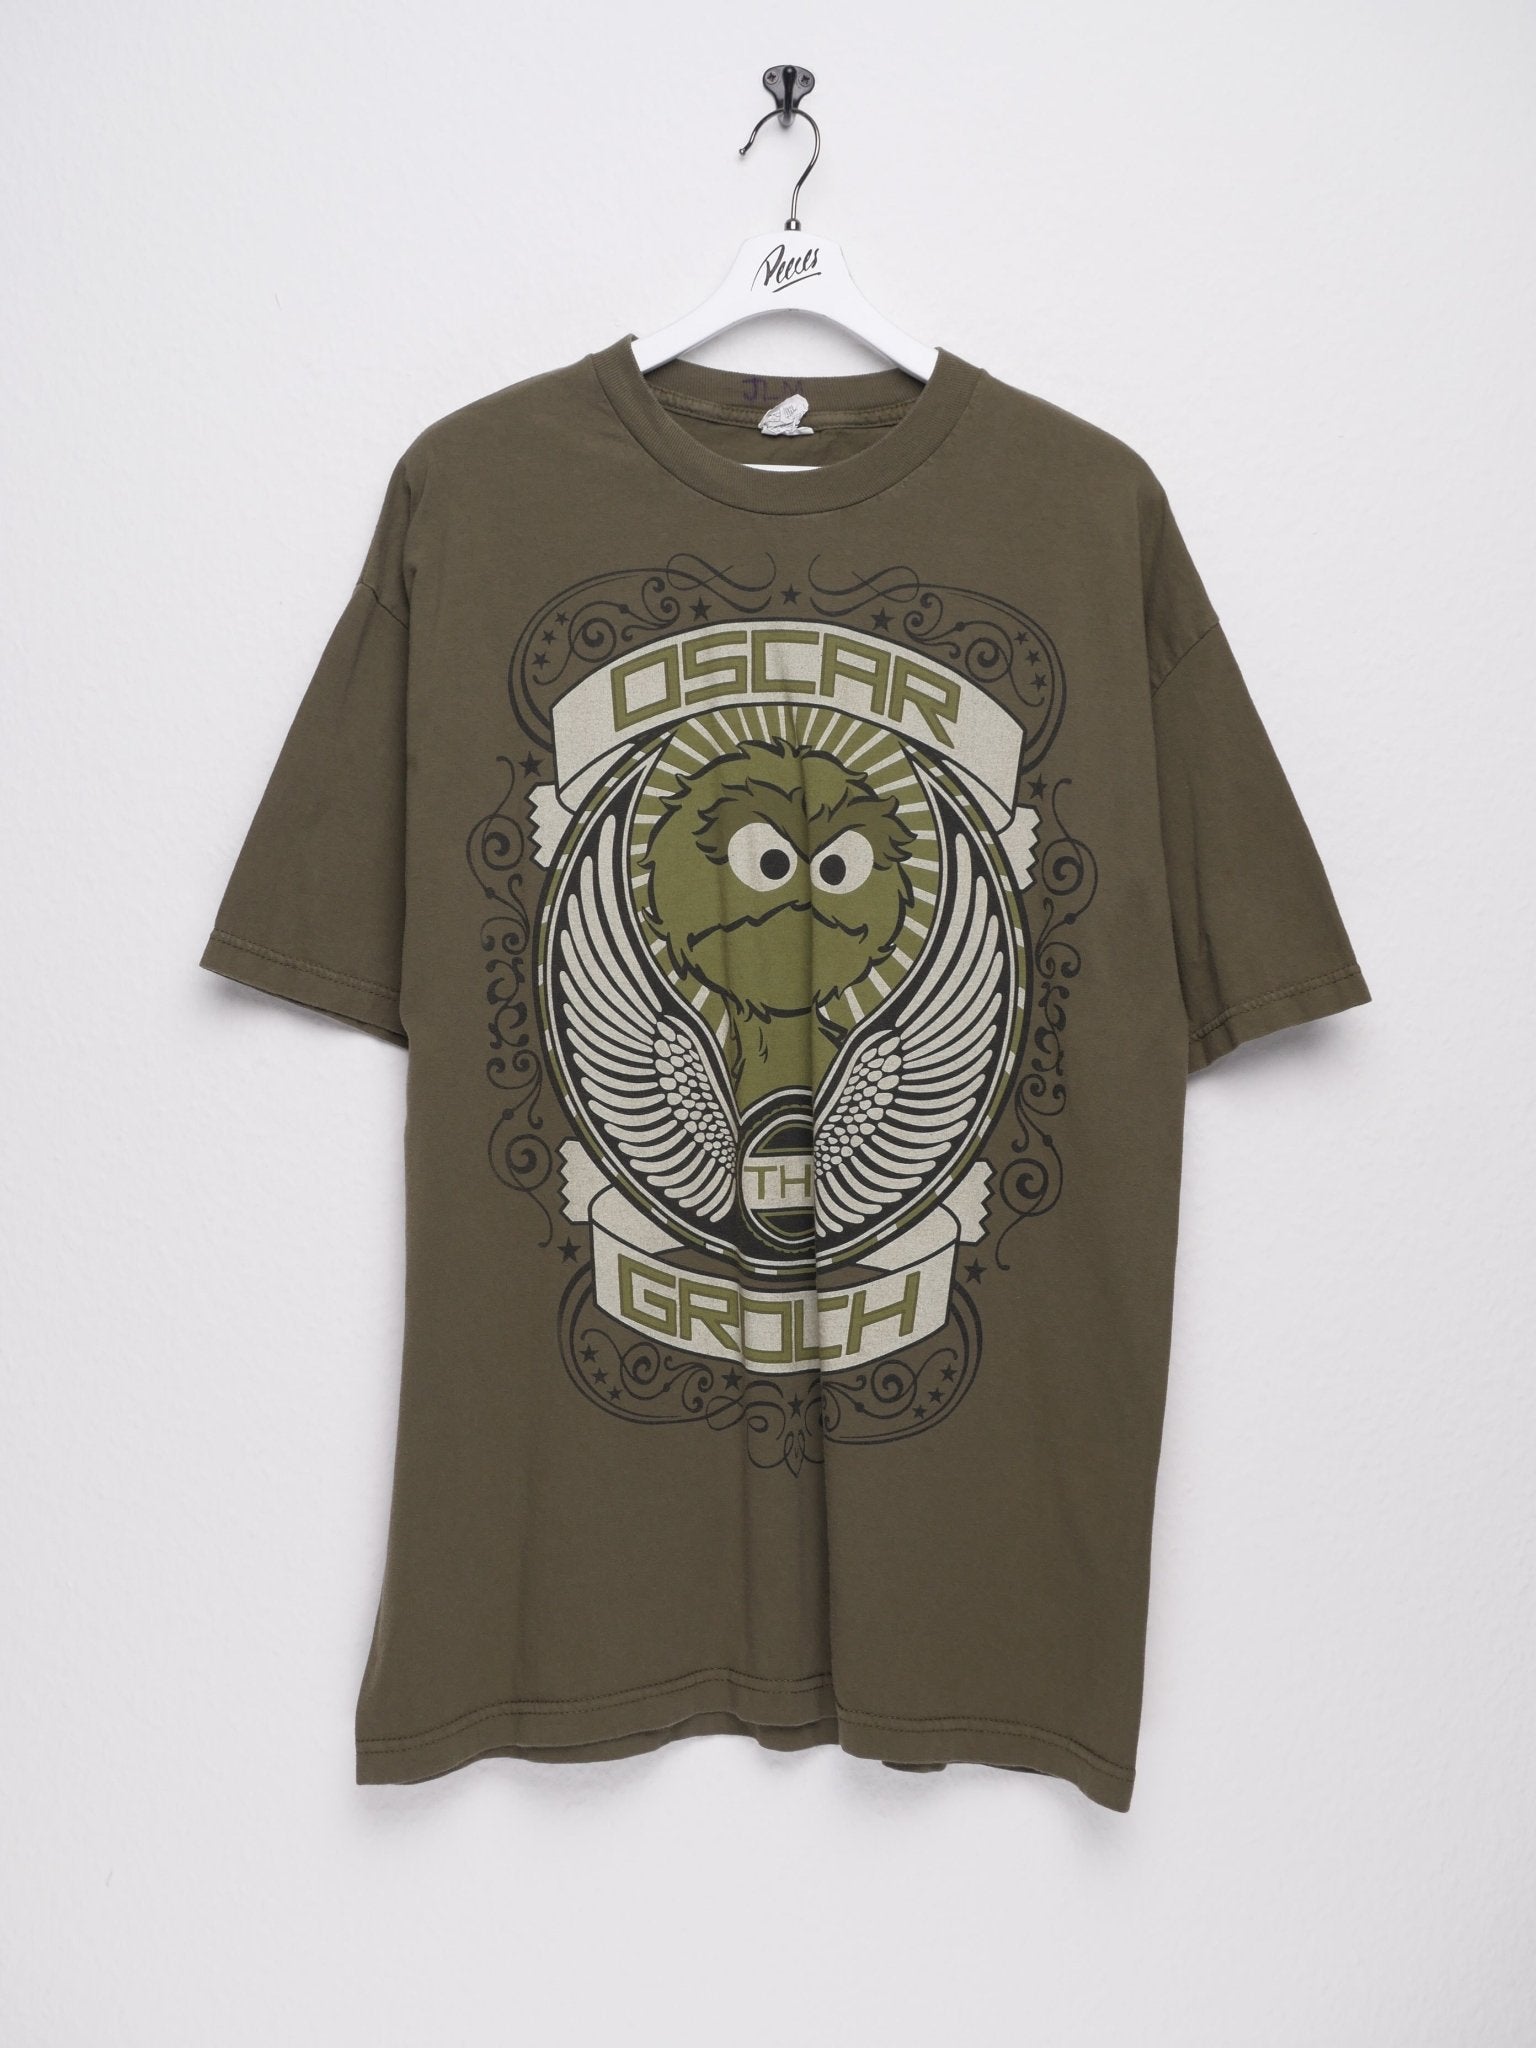 'Oscar the Crouch' printed Graphic olive Shirt - Peeces